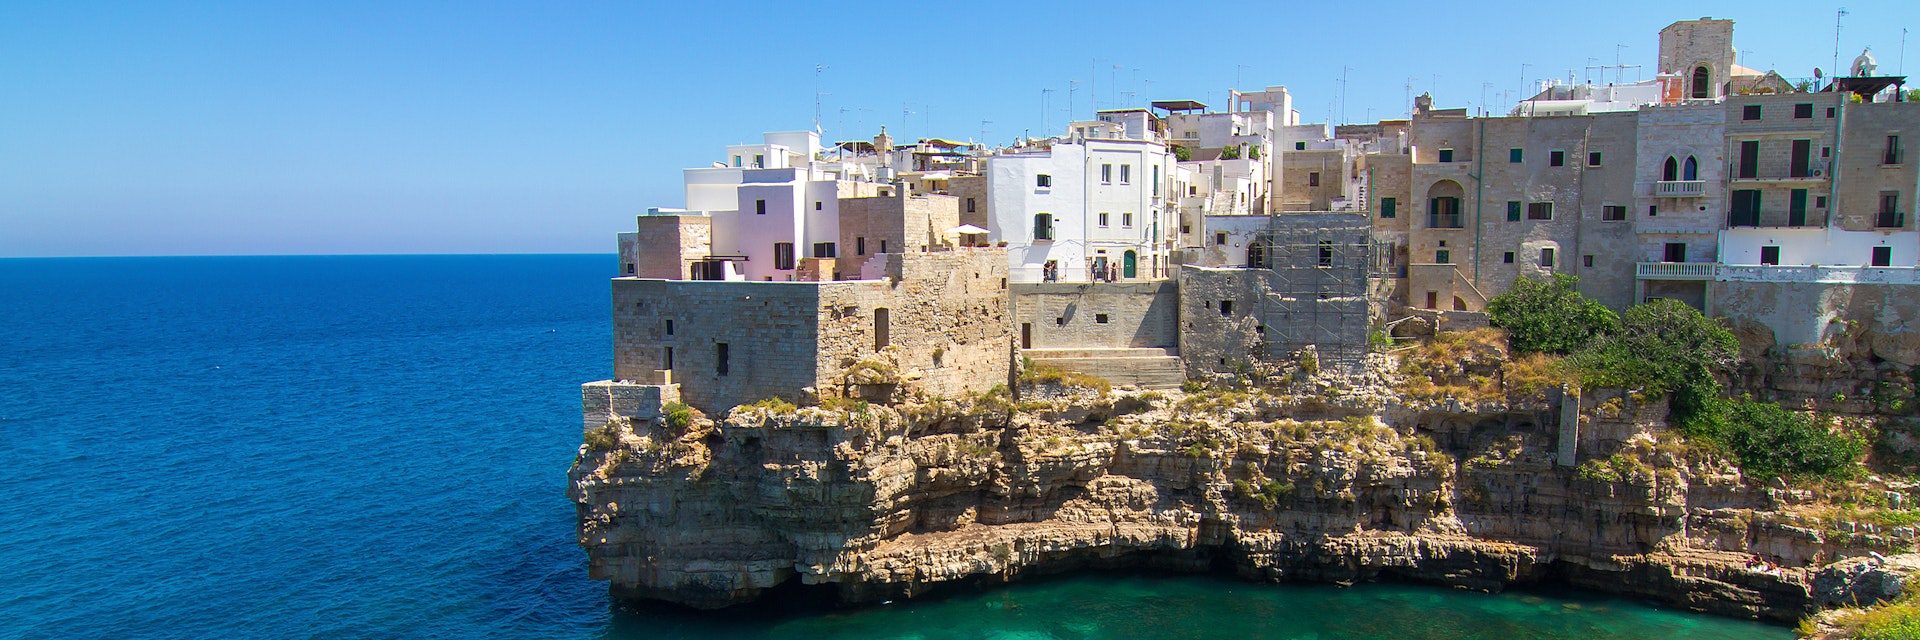 Polignano a Mare: view on green blue sea and cliffs